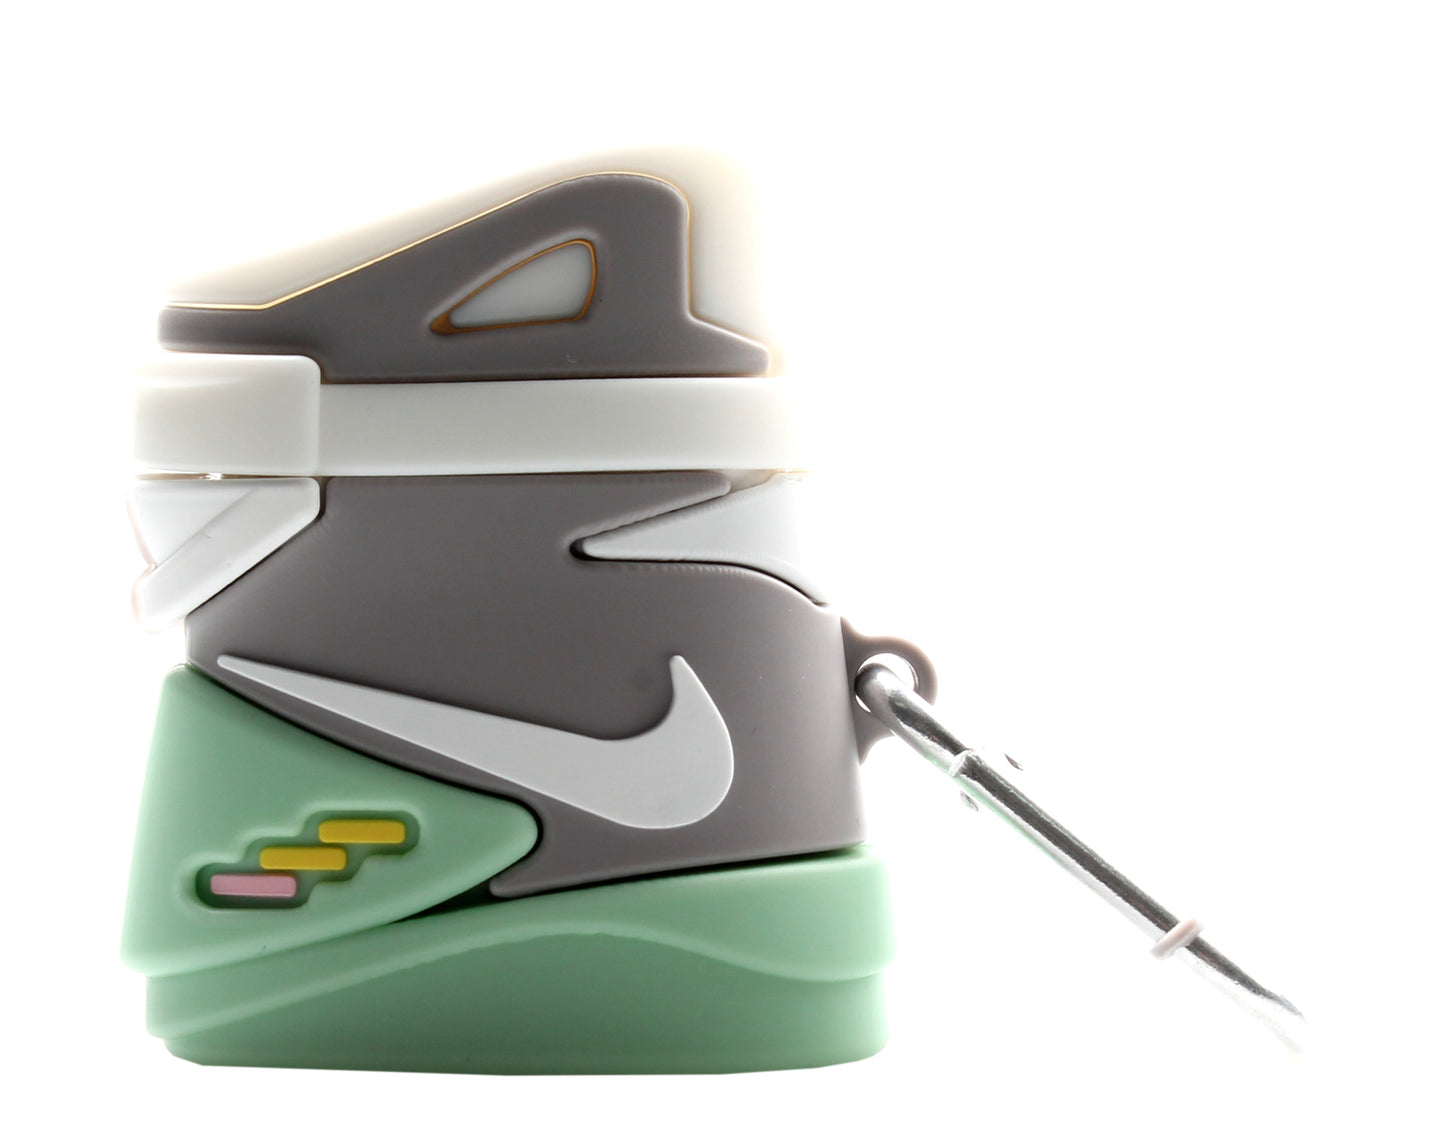 Nike Inspired AirPods Case